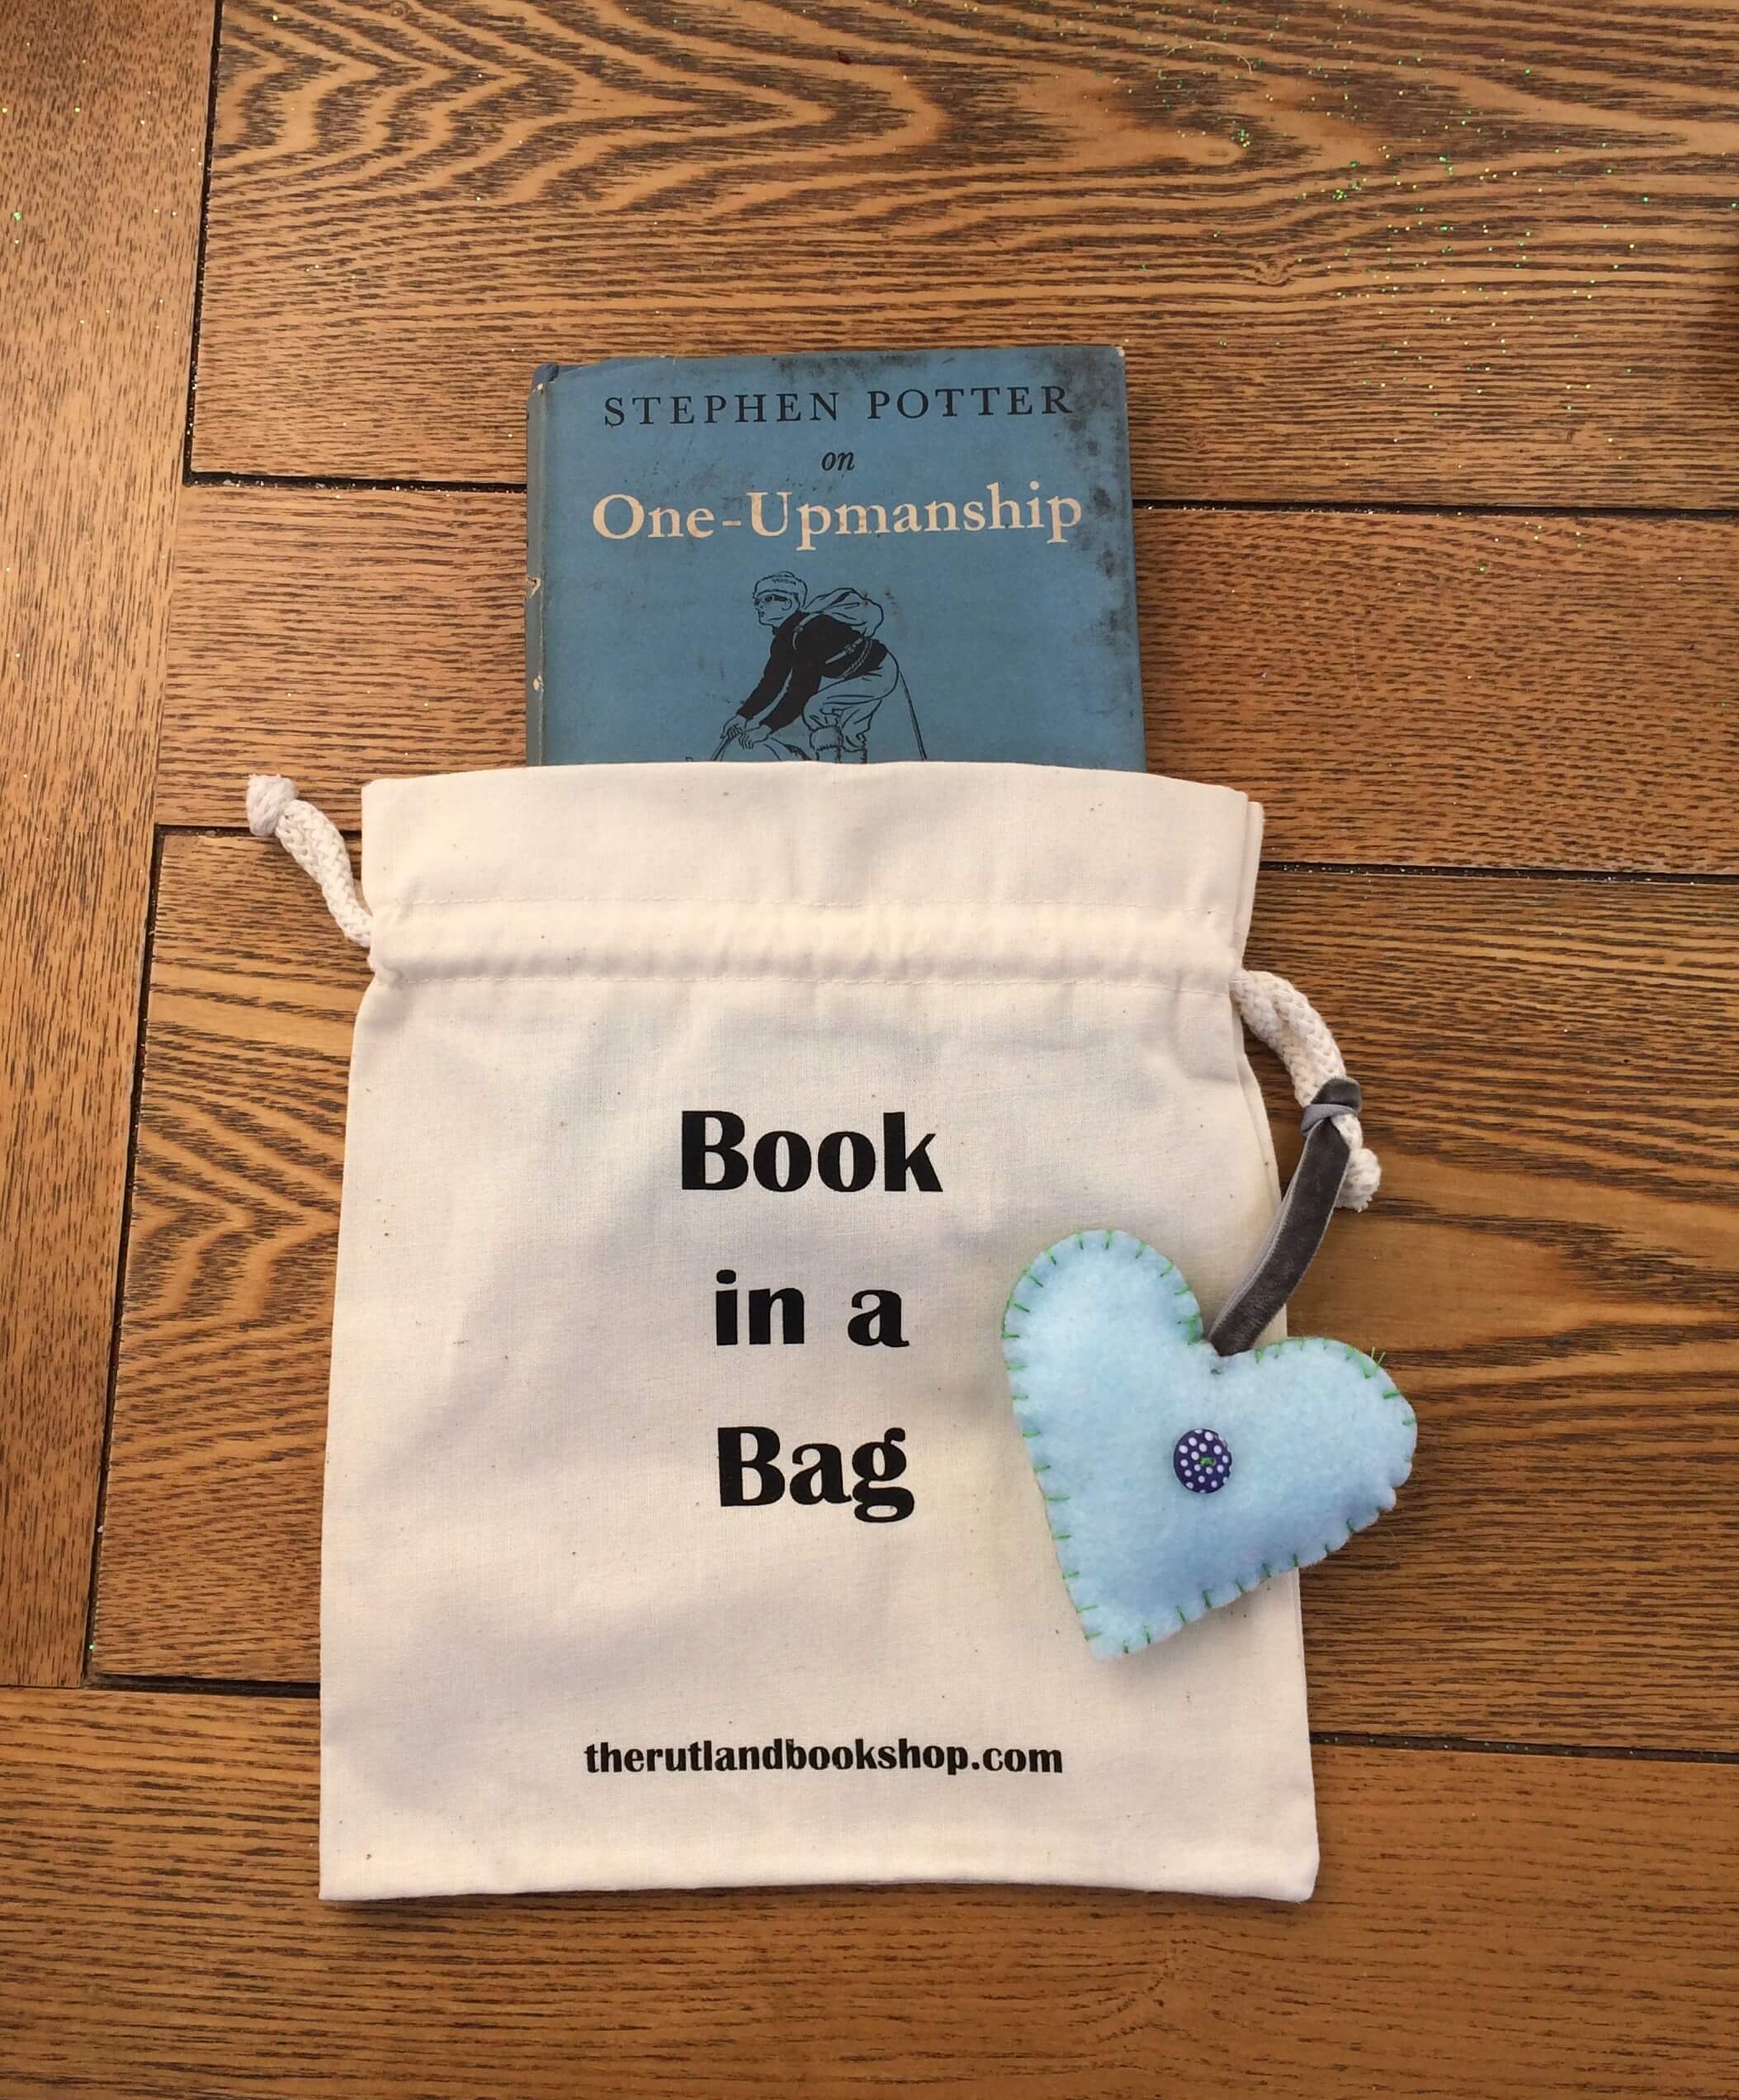 One – Upmanship by Stephen Potter (Book in a Bag)